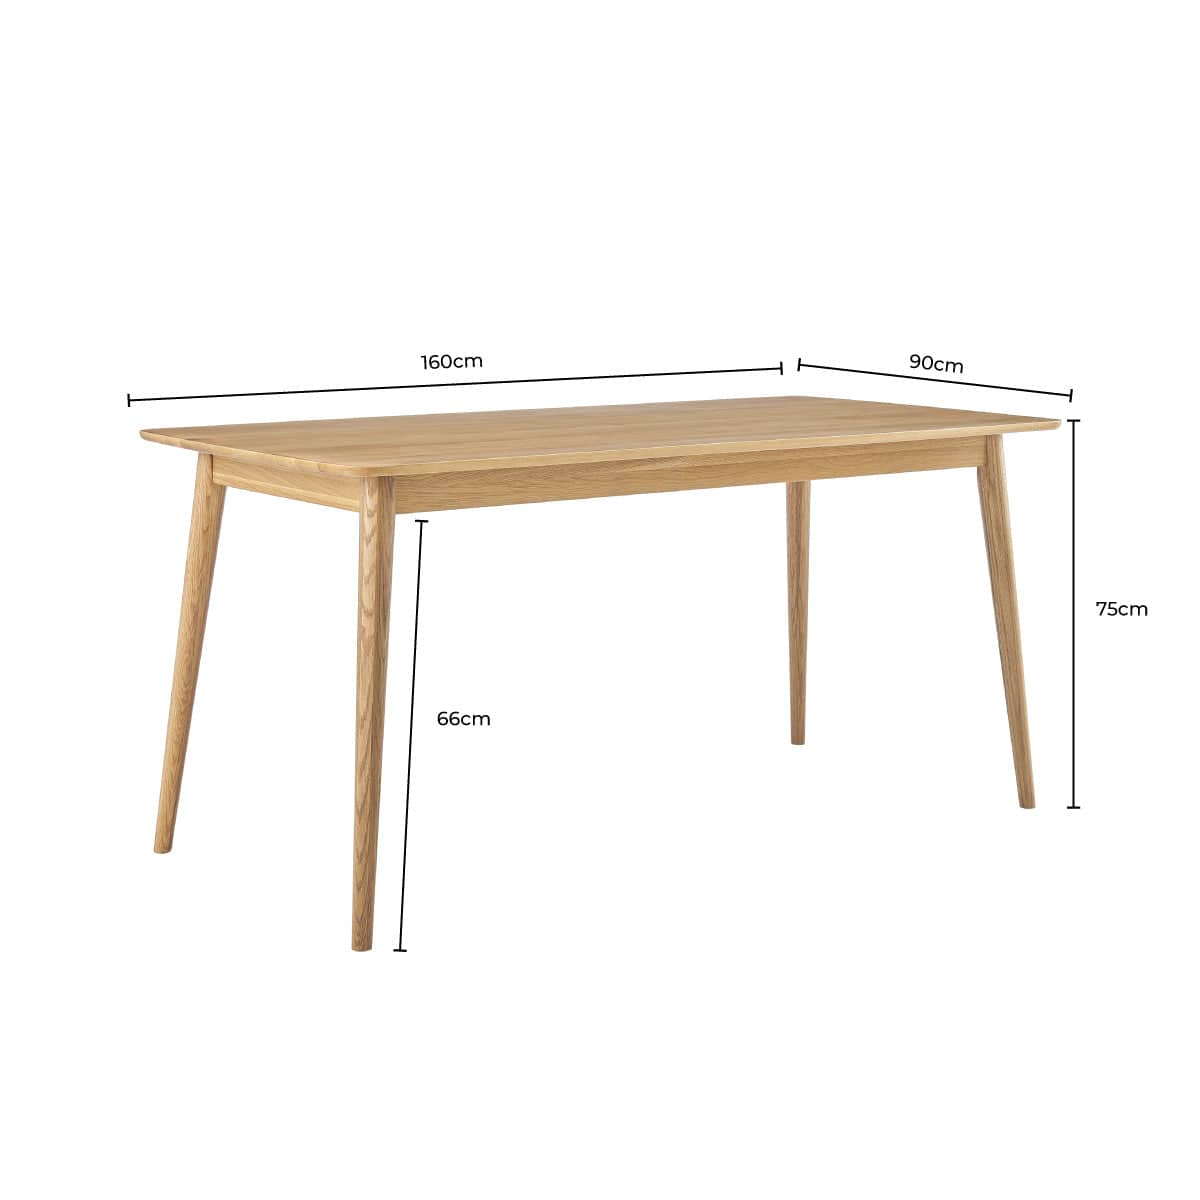 Heidi Solid Oak 4-6 Seater Dining Table - Natural - DUSK